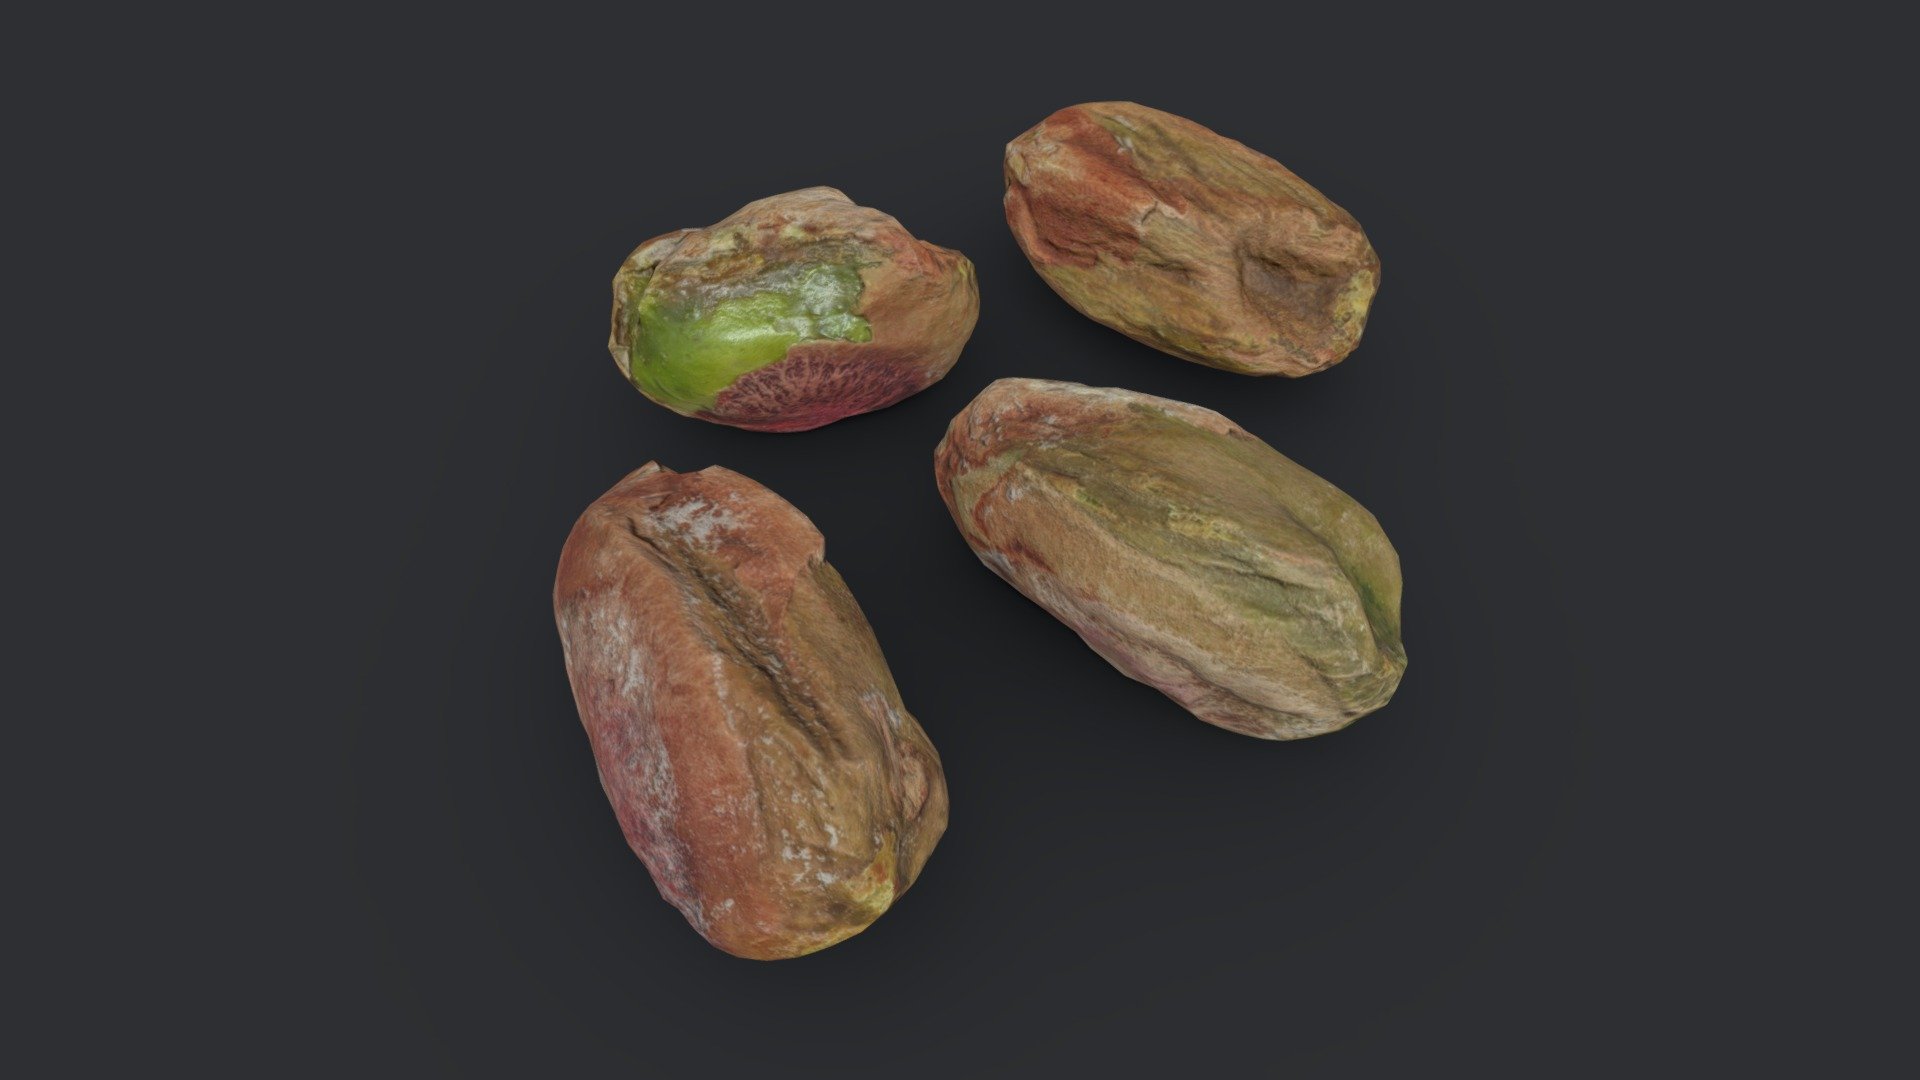 Four individual photogrammetry models of pistachio nut kernels.

Each model has three base levels of detail. Optimized into uniform triangles with clean UVs.

Kernel 1 - LOD1 = 18,944 tris, LOD2 = 1,184 tris, LOD3 = 296 tris,

Kernel 2 - LOD1 = 19,200 tris, LOD2 = 1,200 tris, LOD3 = 300 tris,

Kernel 3 - LOD1 = 19,456 tris, LOD2 = 1,216 tris, LOD3 = 304 tris,

Kernel 4 - LOD1 = 19,200 tris, LOD2 = 1,200 tris, LOD3 = 300 tris,


4K PNG textures (Albedo, Normal, Roughness, Gloss and Ambient Occlusion). All levels of detail share the same textures except for the Normal map, where each LOD has a unique Normal.

LOD2 used for 3D preview with 1K JPG textures.

Real world scale 3d model